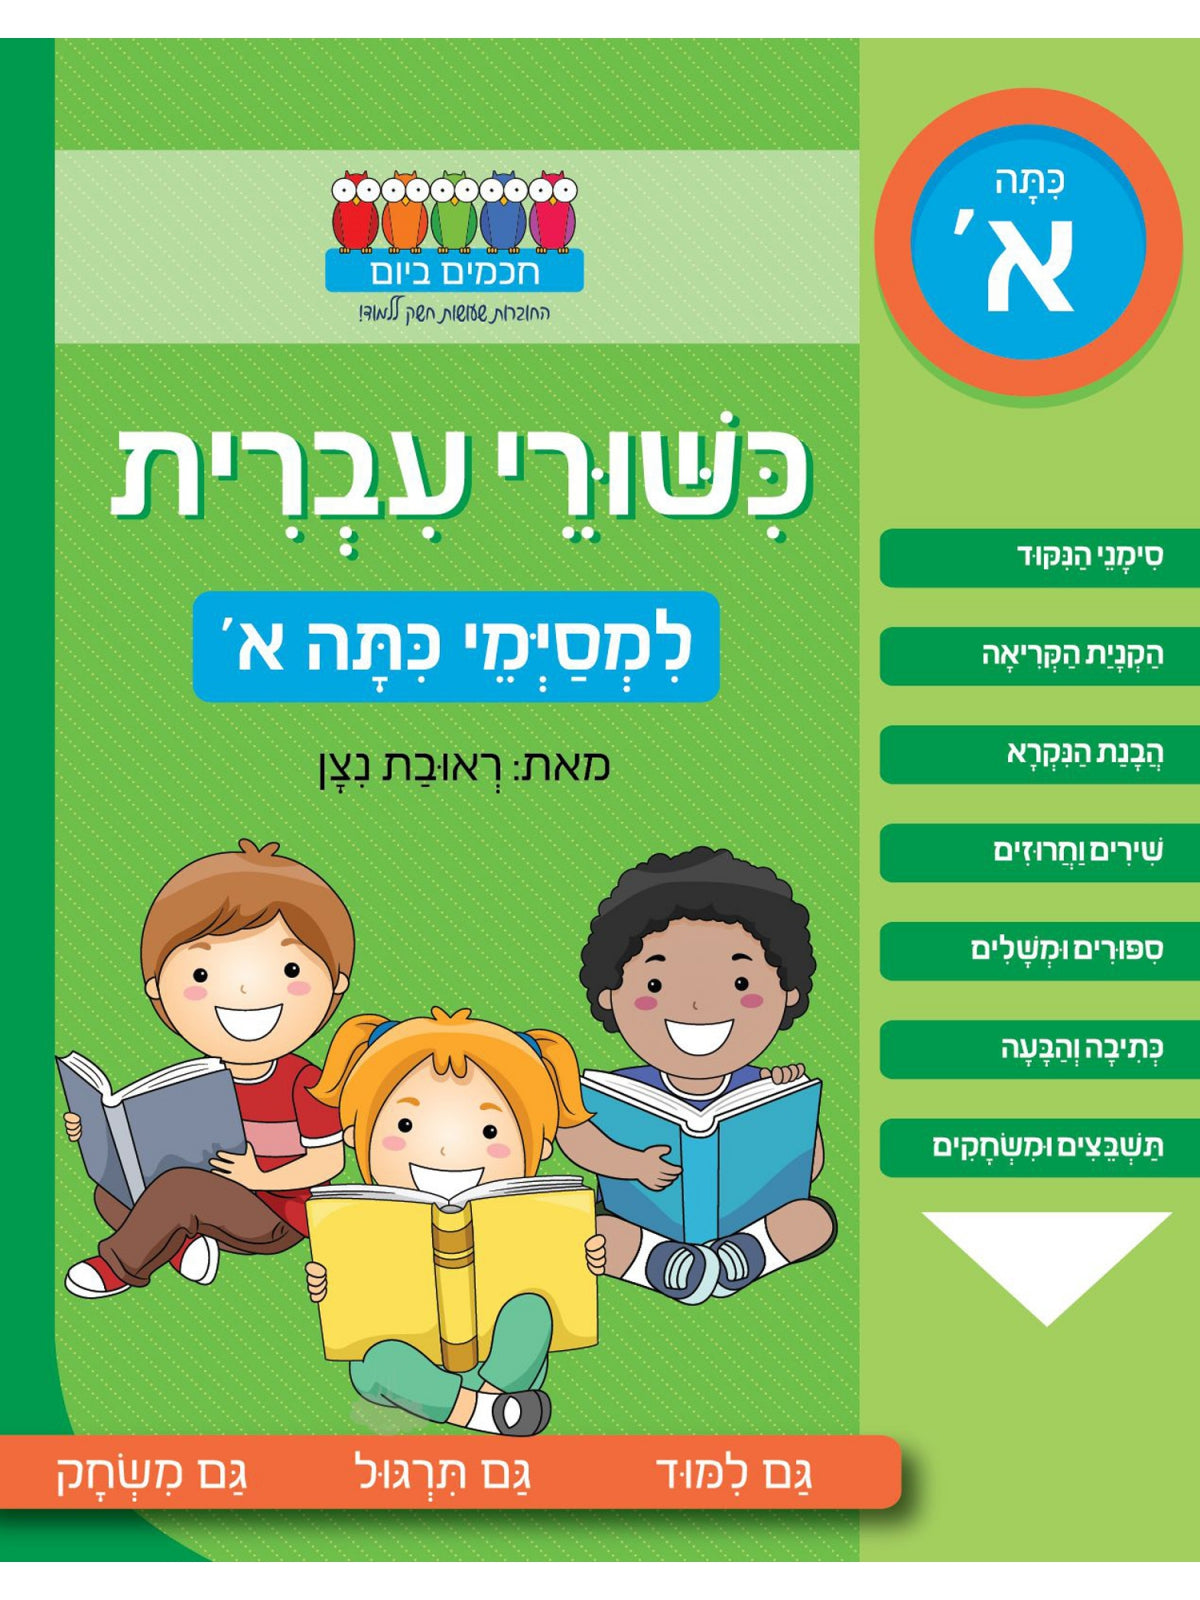 HEBREW LESSONS FOR 1ST GRADERS WHO ARE WISE IN THE DAY